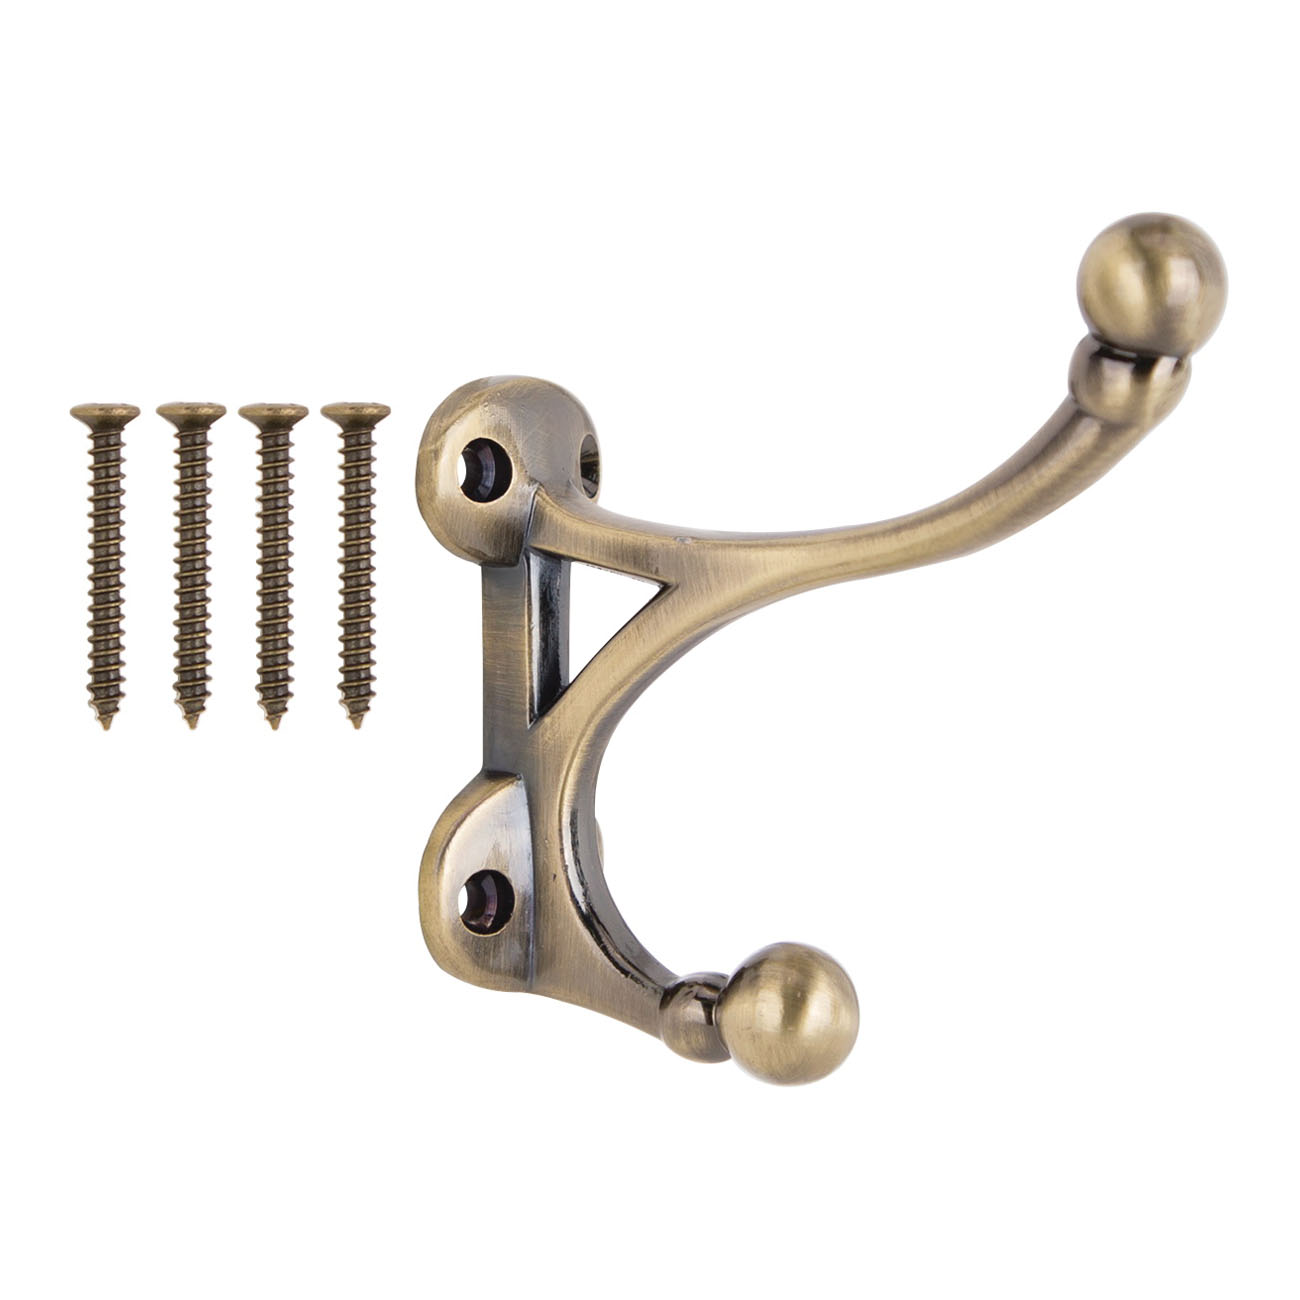 H-014-AB Coat and Hat Hook, 33 lb, 2-Hook, 1-1/2 in Opening, Zinc, Antique Brass